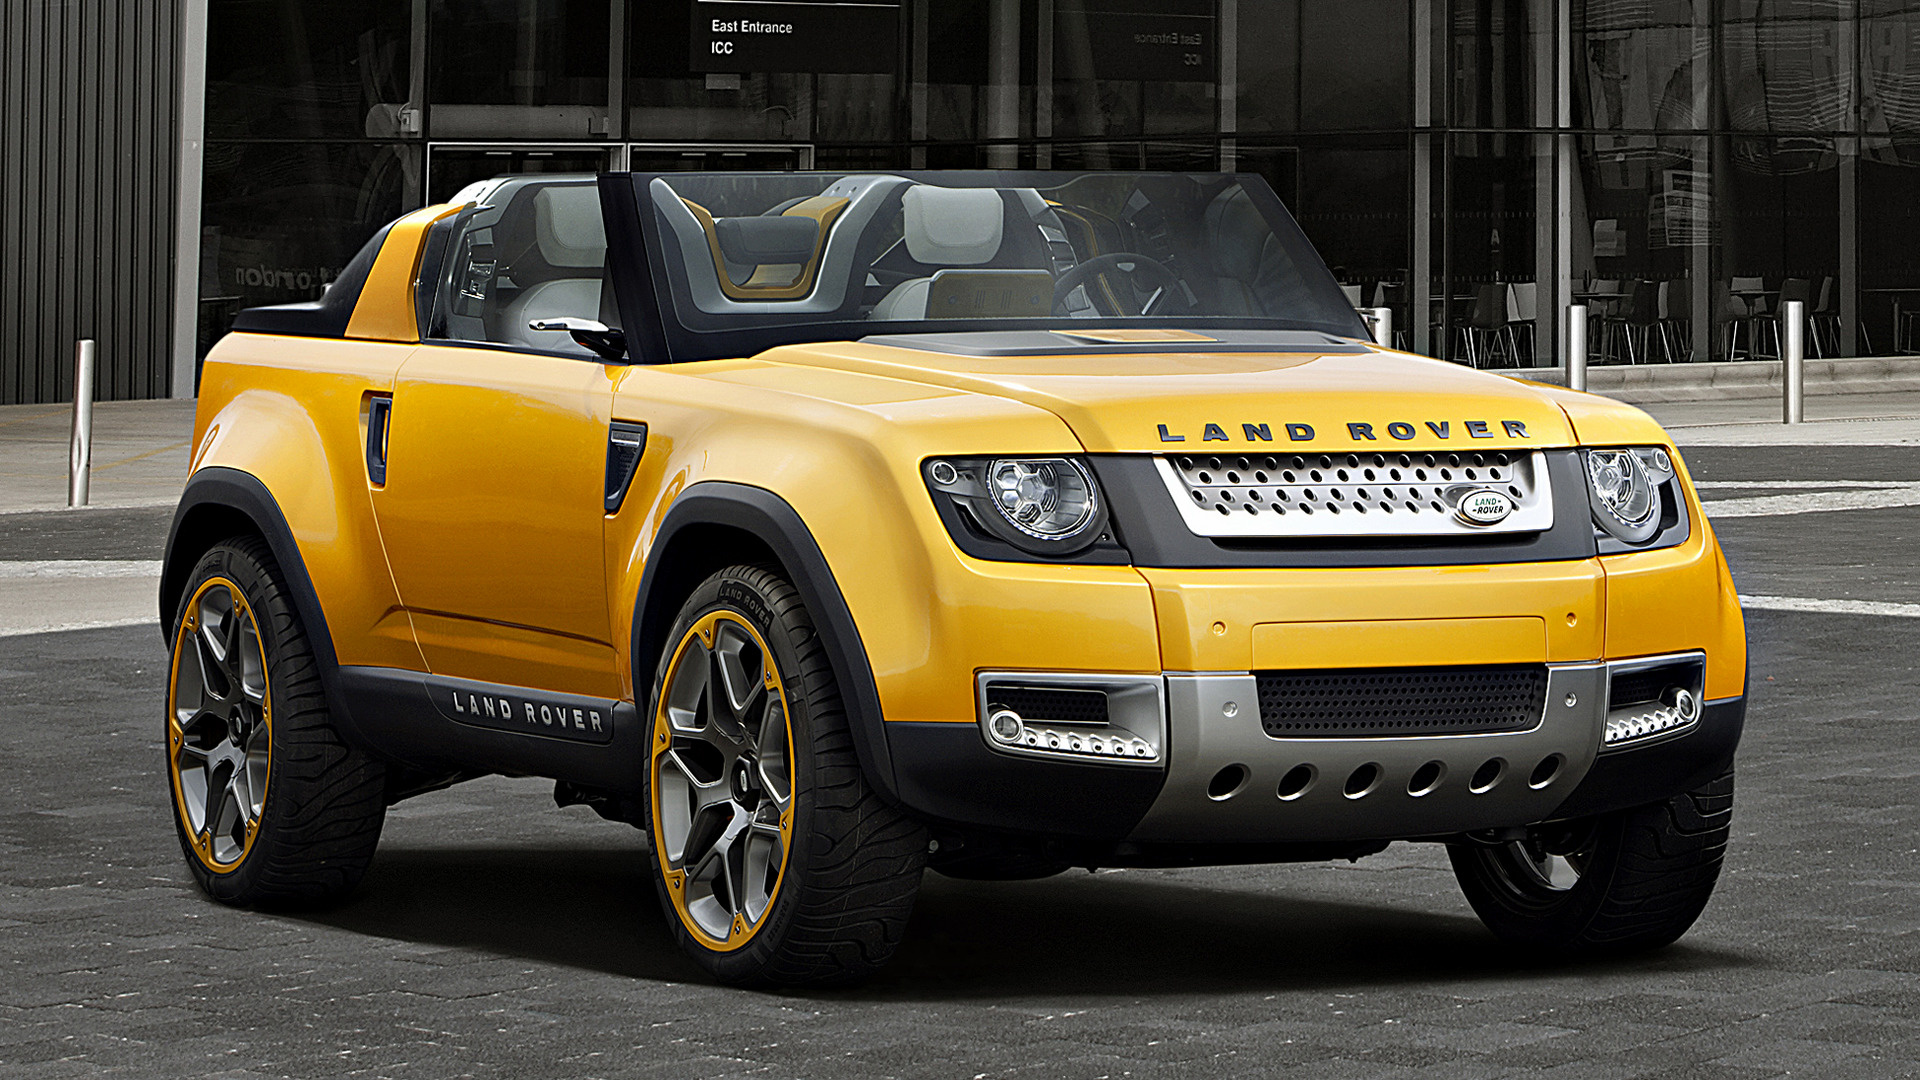 2011 Land Rover DC100 Sport Concept Wallpapers and HD